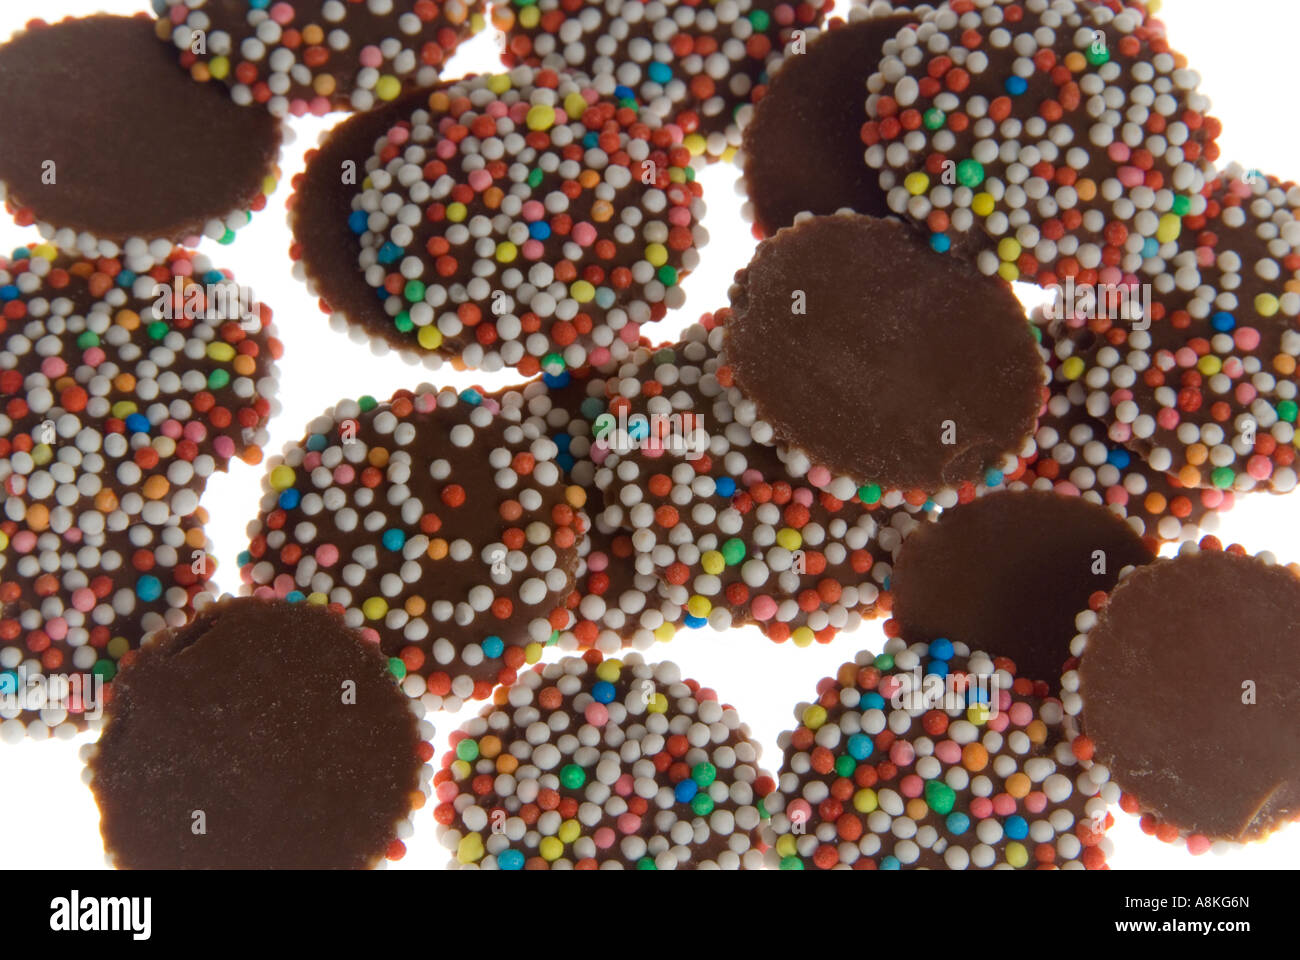 Horizontal elevated close up of a pile of milk chocolate buttons on a white background. Stock Photo